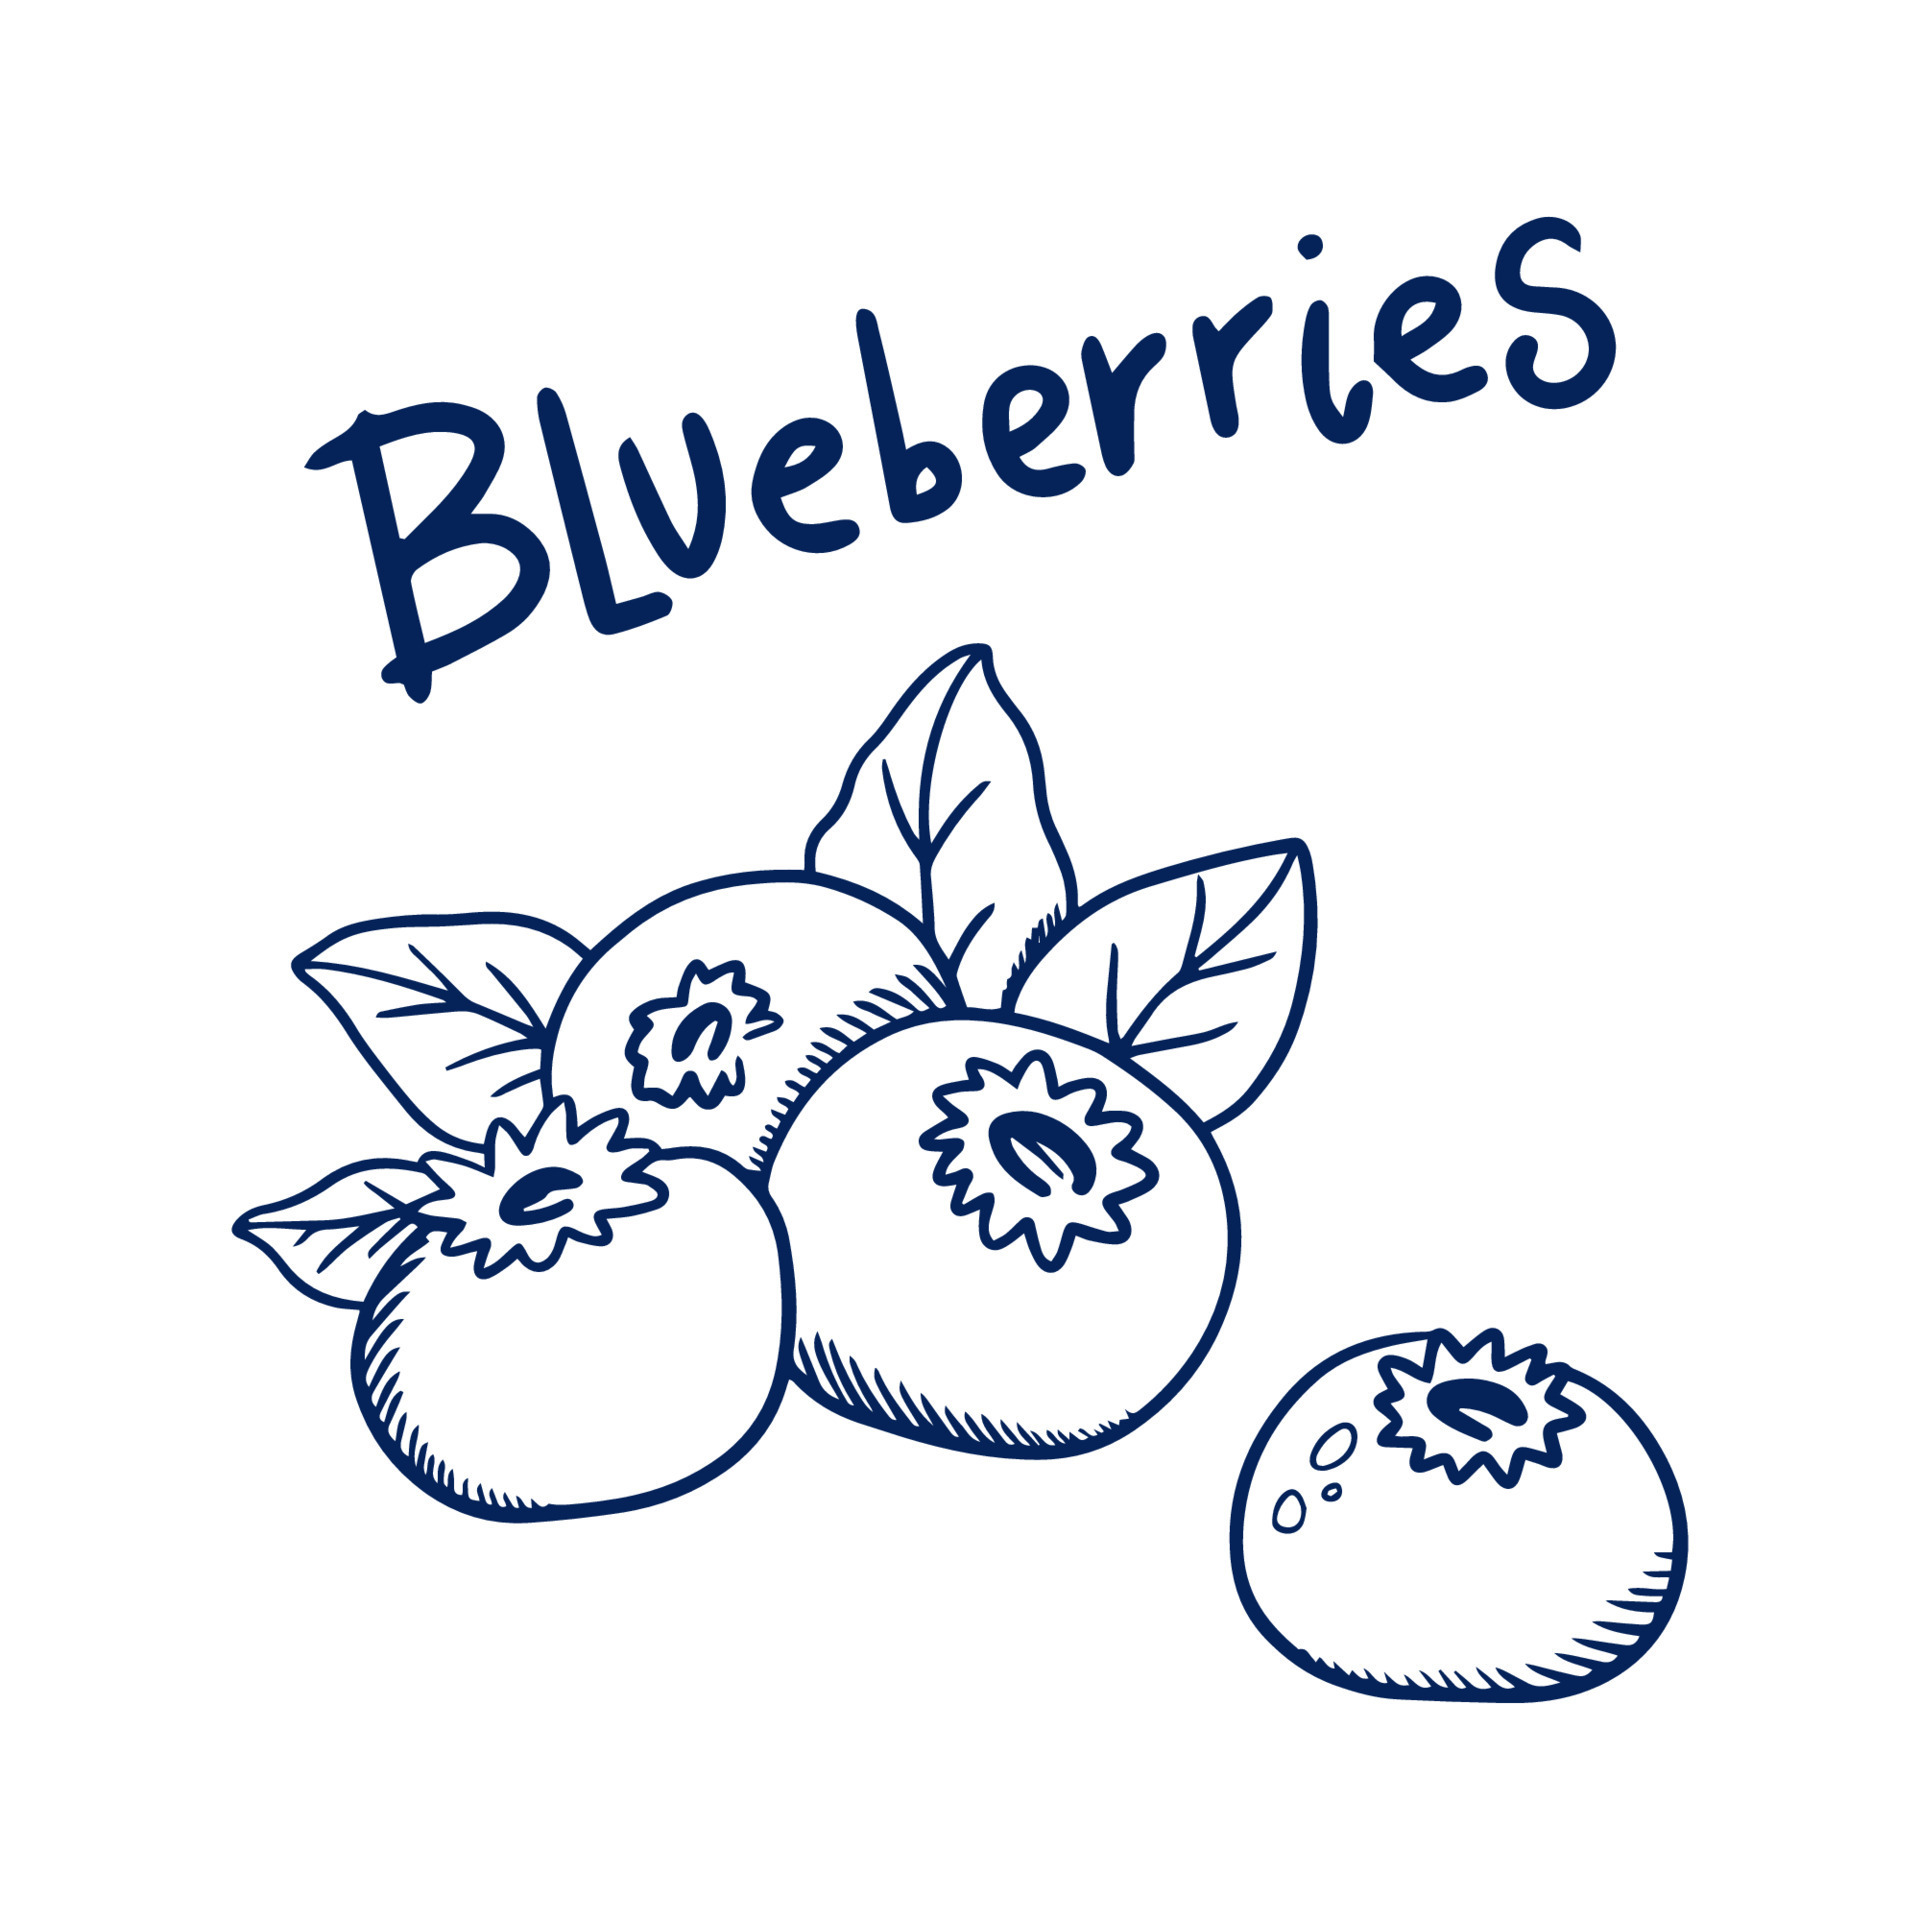 Blueberry hand drawn sketch forest berry fruits  Stock Illustration  62270713  PIXTA